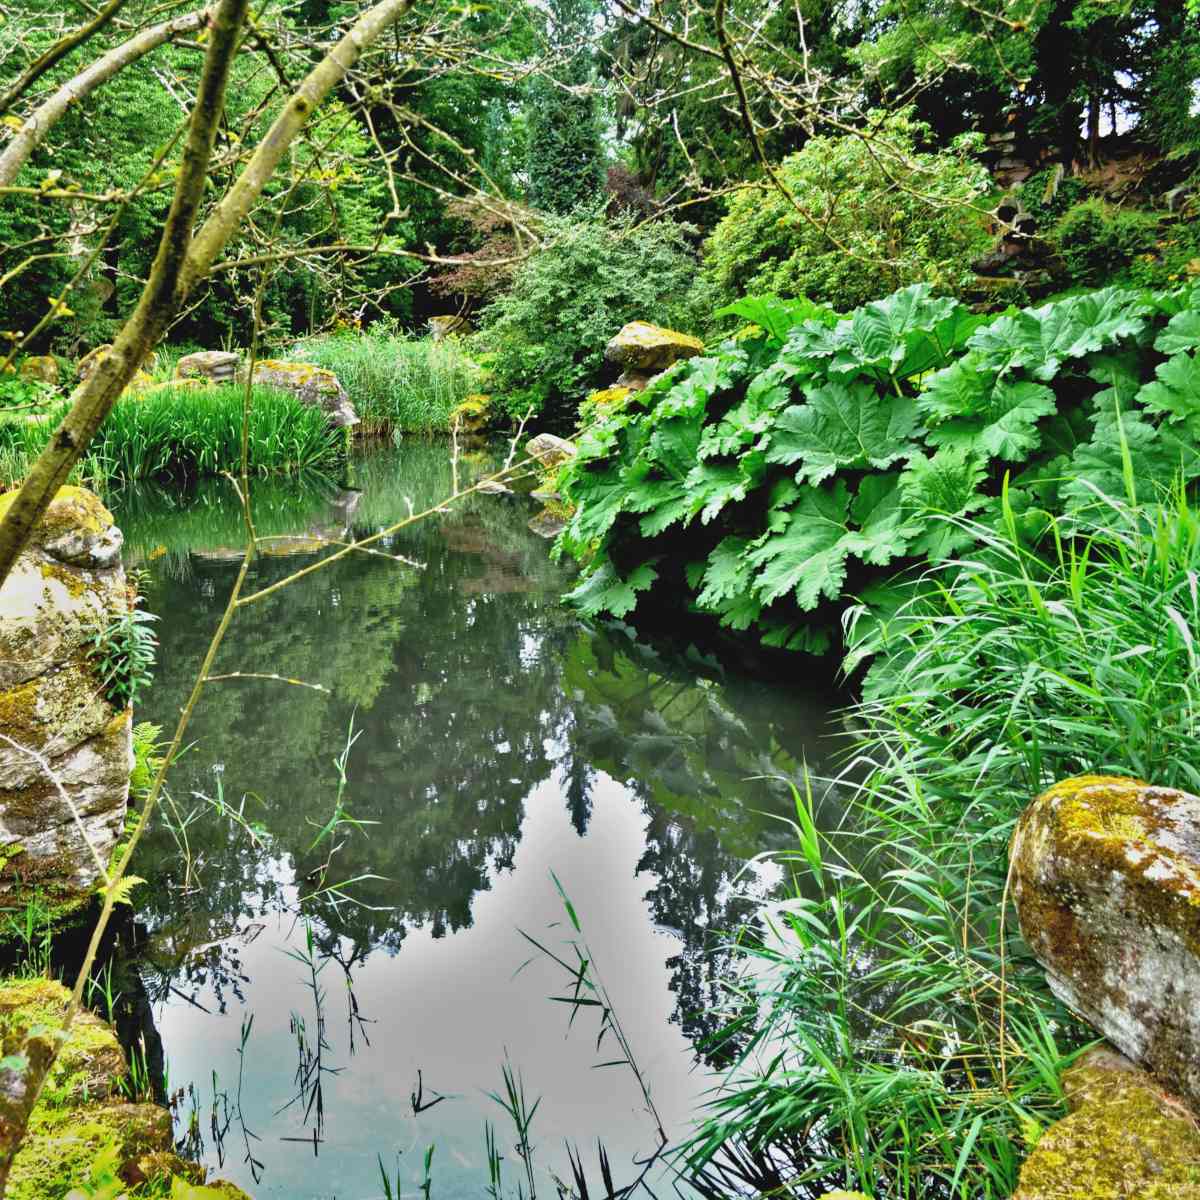 Pond with plants and rocks